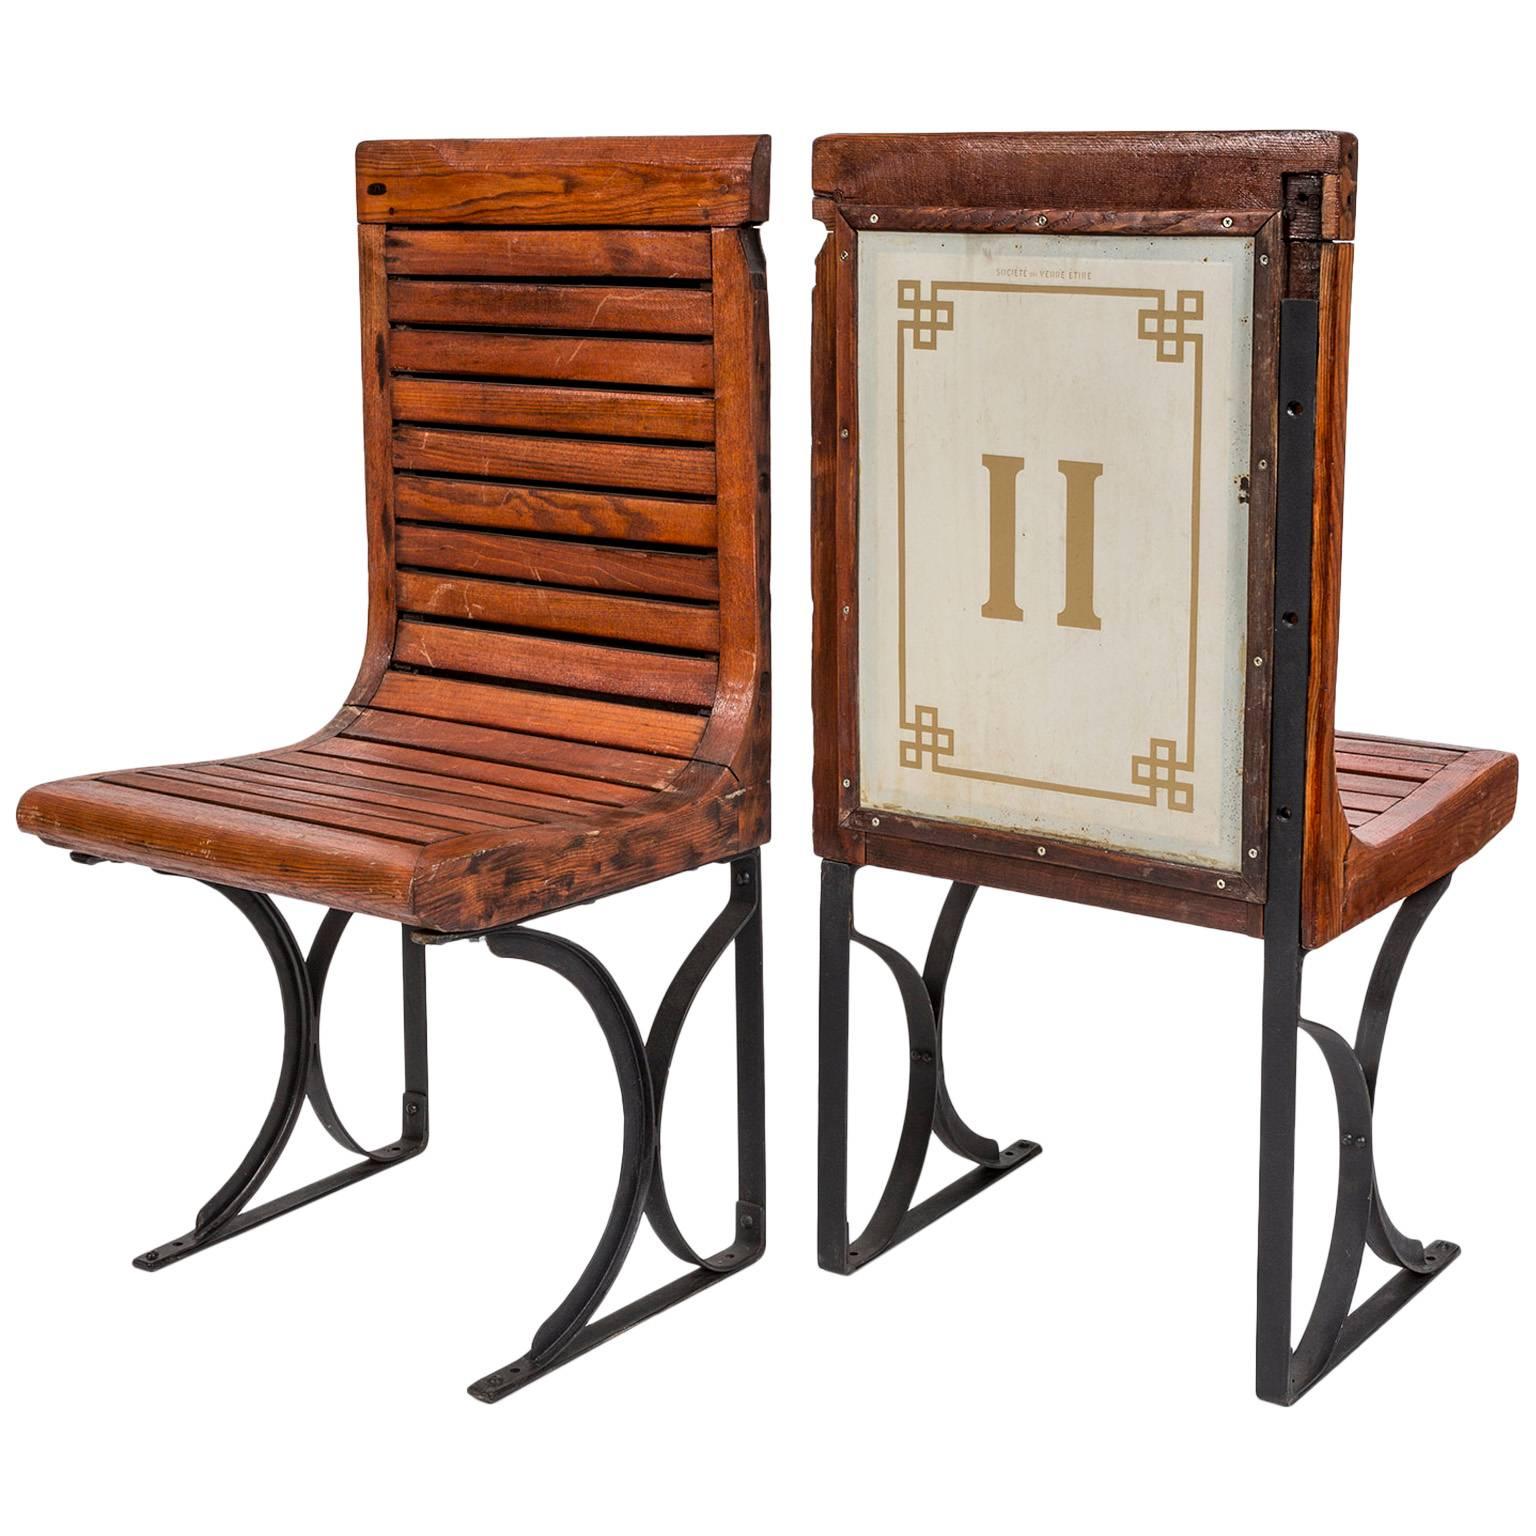 Pair of 1920s Second Class Paris Metro Chairs with Enamel Backing